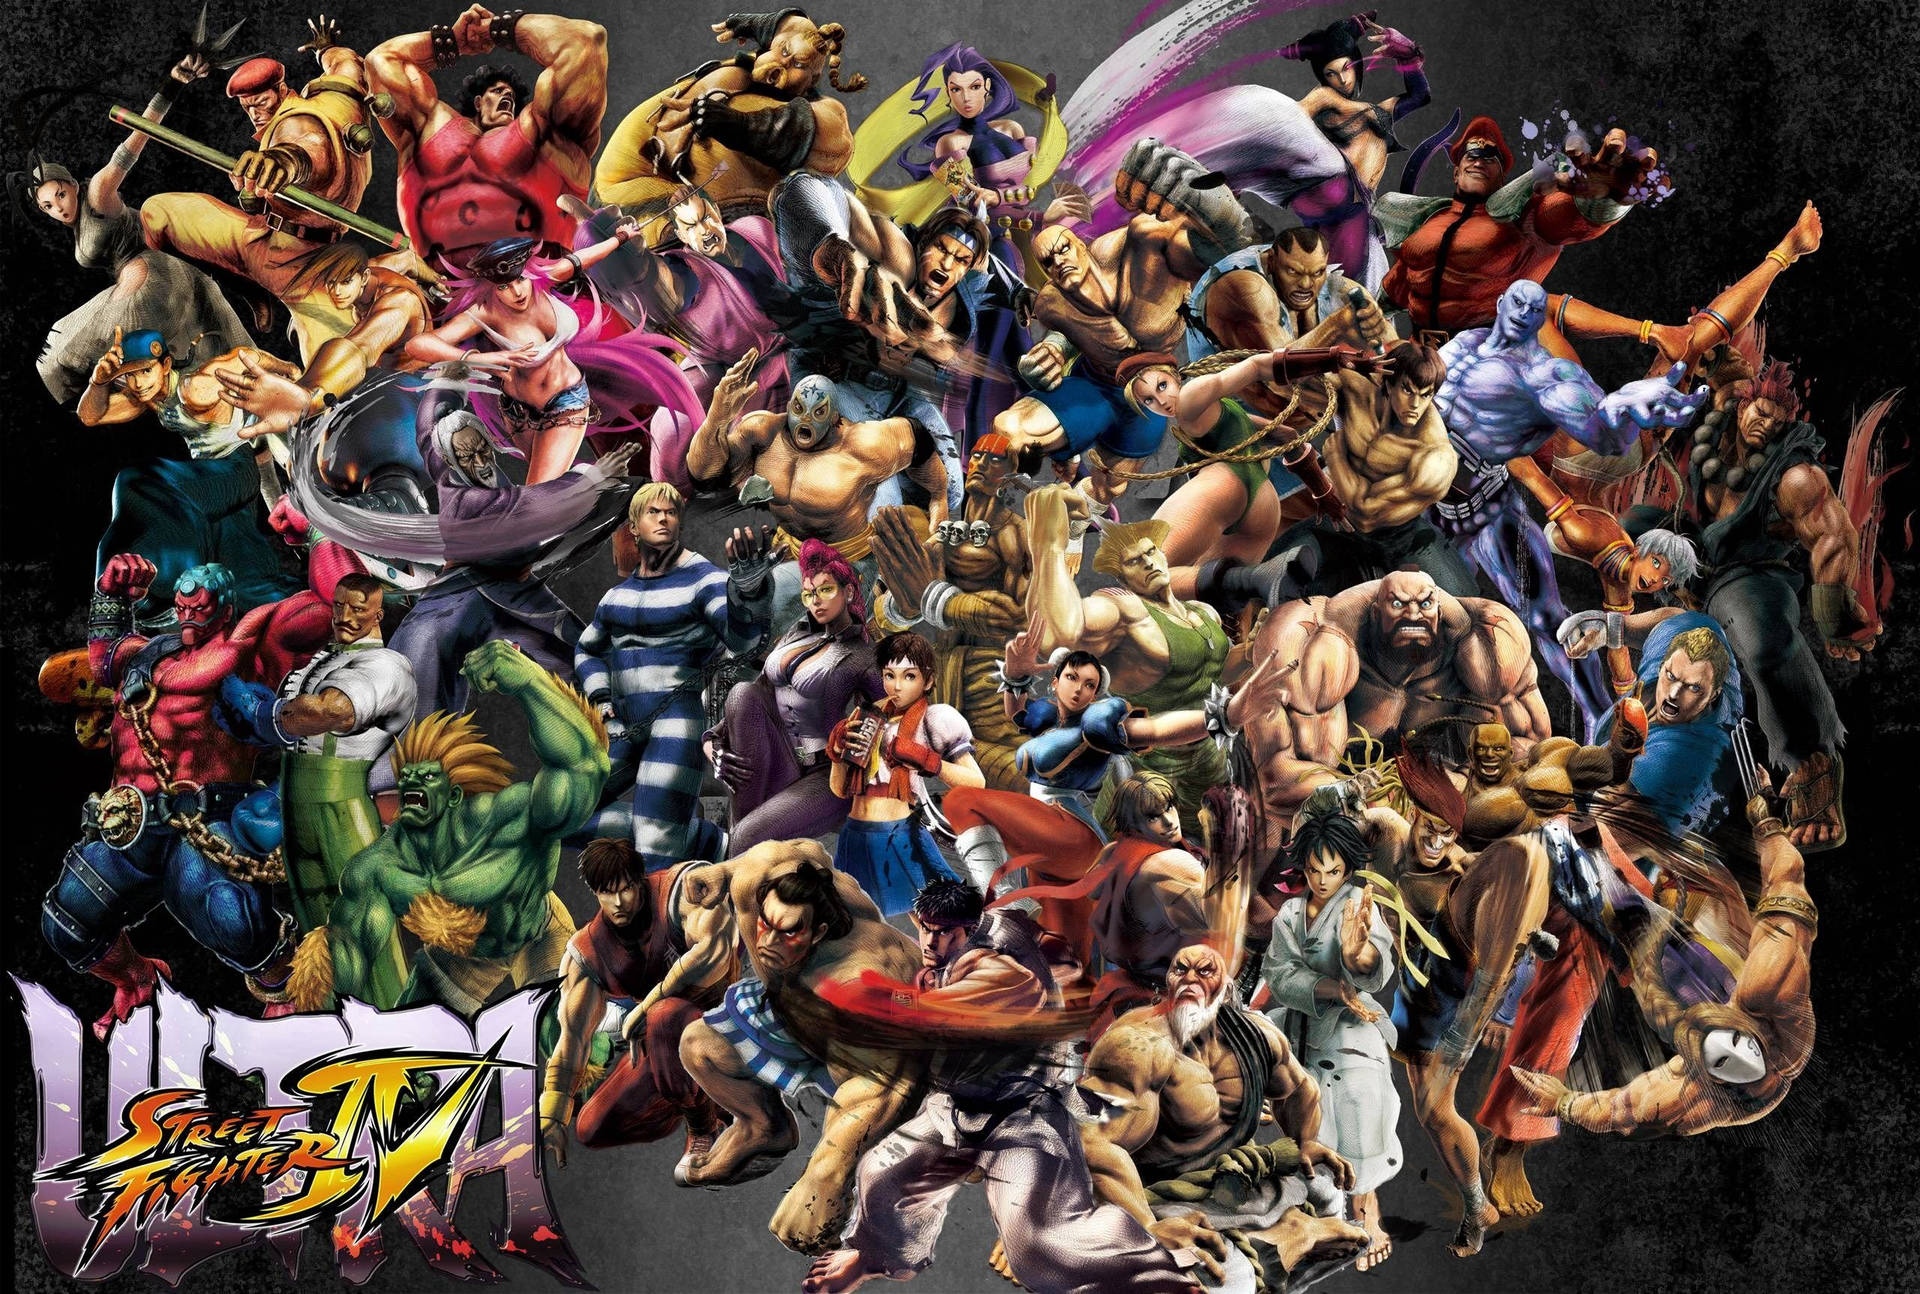 Complete Ultra Street Fighter 4 Background